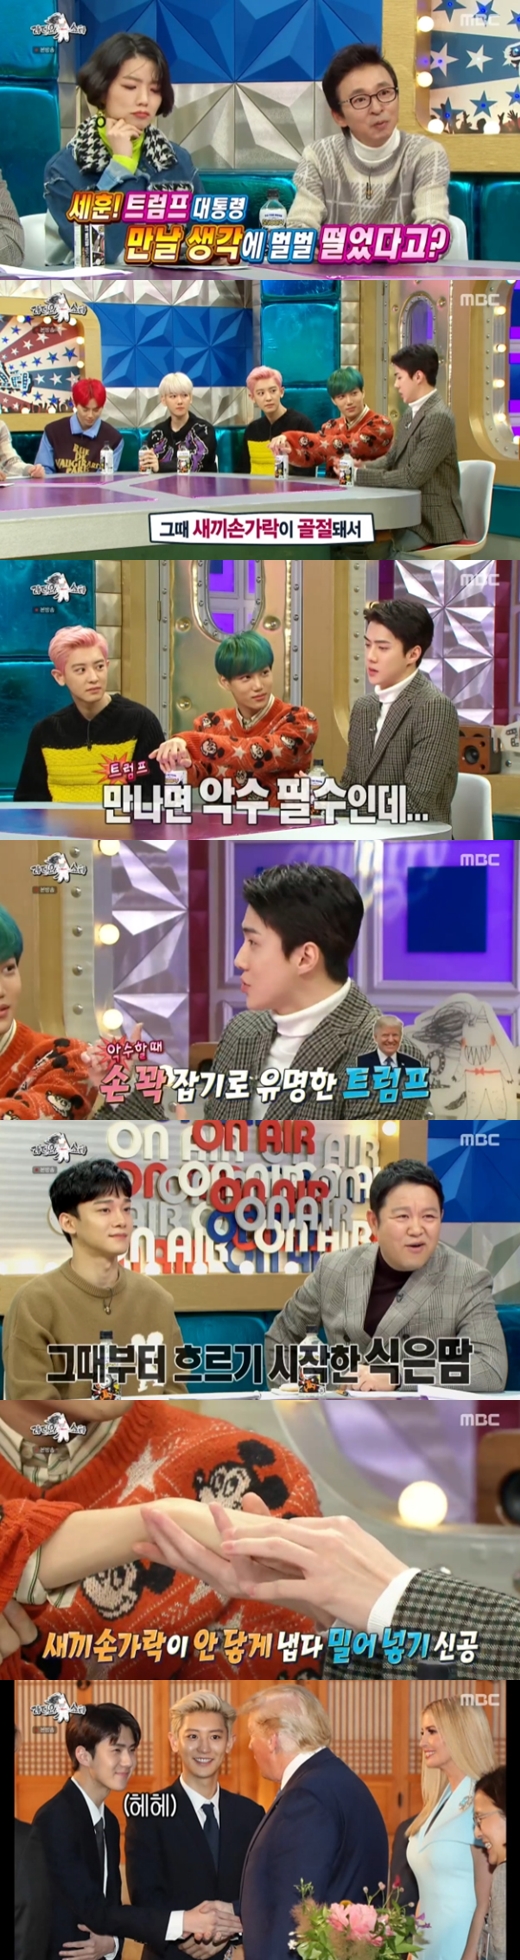 Group EXO Sehun has revealed an anecdote that has been tense ahead of a handshake with President Ivana Trump.MBC Radio Star, which was broadcasted on the 4th night, was featured in EXO Cleo Star and appeared in EXO members Suho, Baekhyun, Chanyeol, Kai, Sehun and Chen.I was wearing a protective brace because my little finger was fractured, Sehun said, recalling being invited to the presidential office at the time of President Ivana Trumps visit.I have to shake hands, but (President Ivana Trump is famous for holding hands), I have to talk in advance, but I have to endure it like a man. I shook hands, and I was a person, so I closed my hands so my little finger could not reach, Sehun said with a smile.